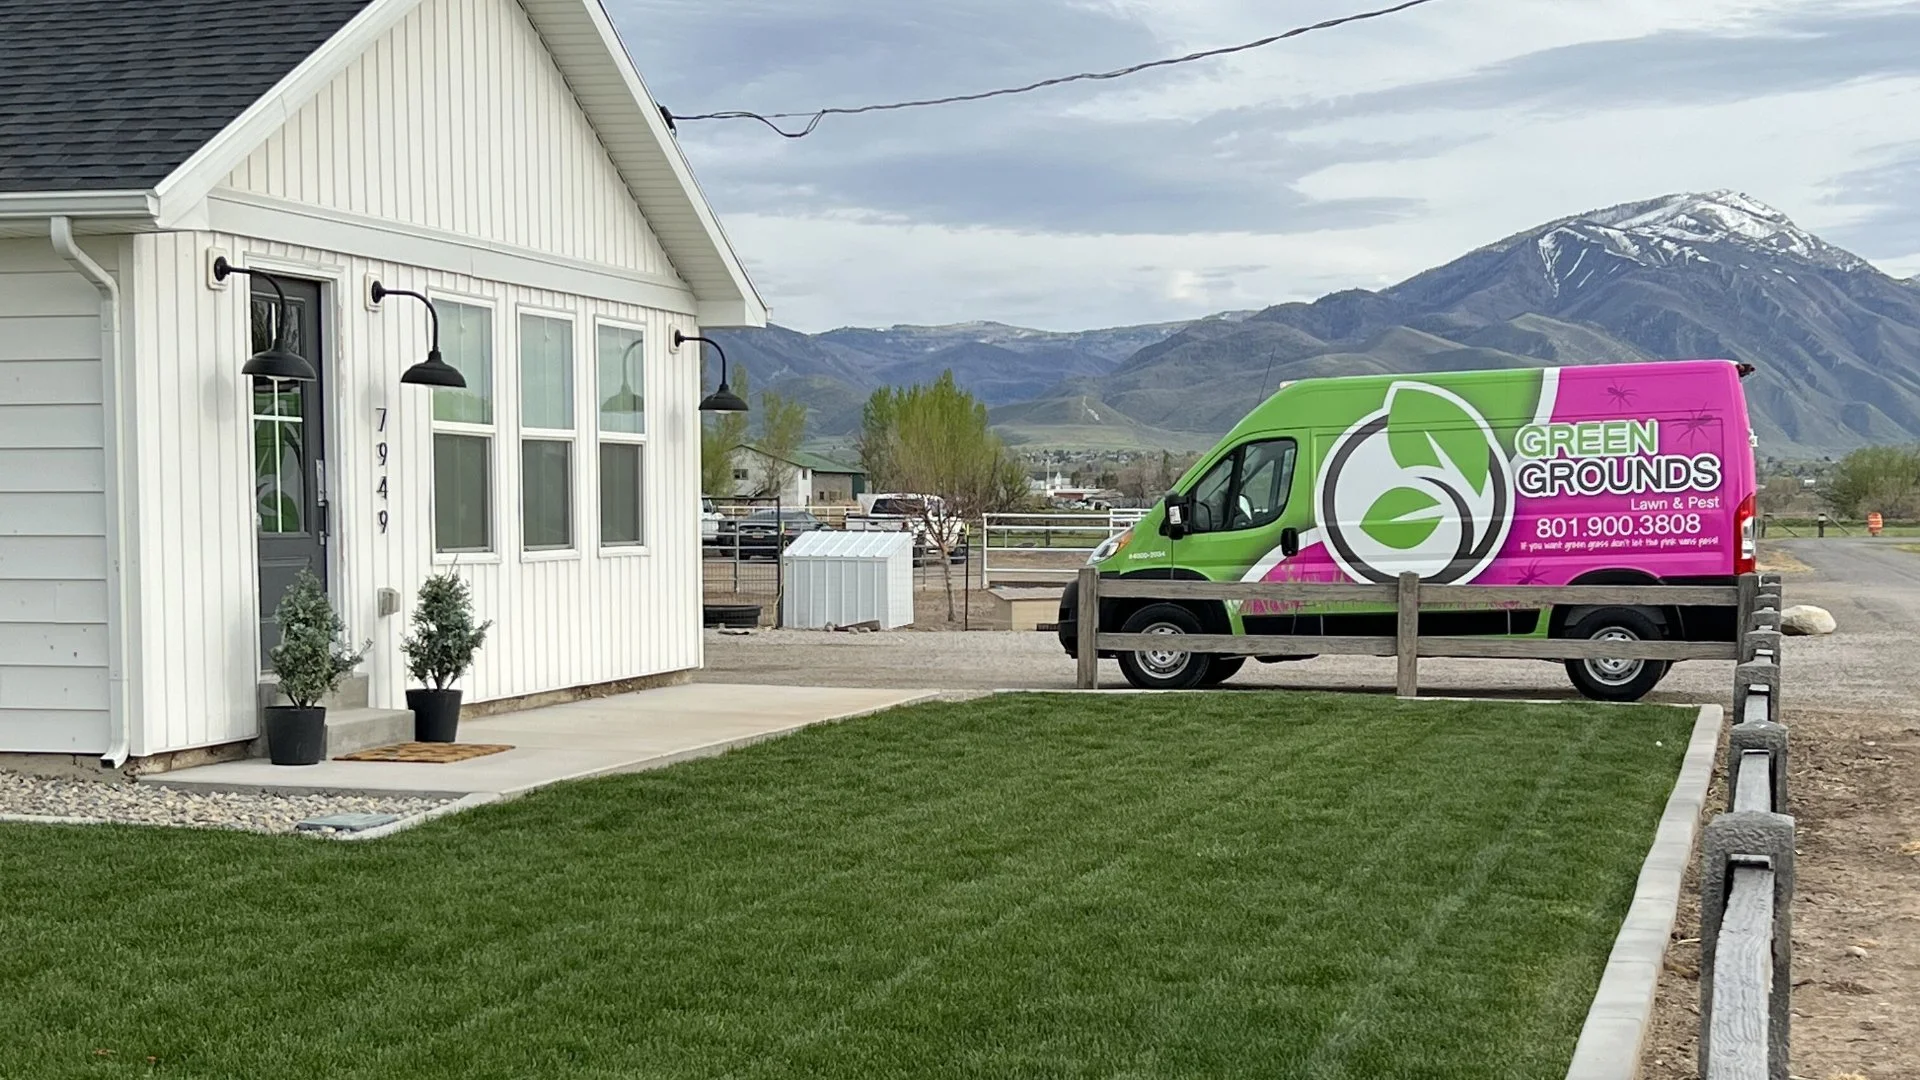 Green Grounds Lawn & Pest van arriving to apply lawn fertilizer treatments on a property in Midway, UT.